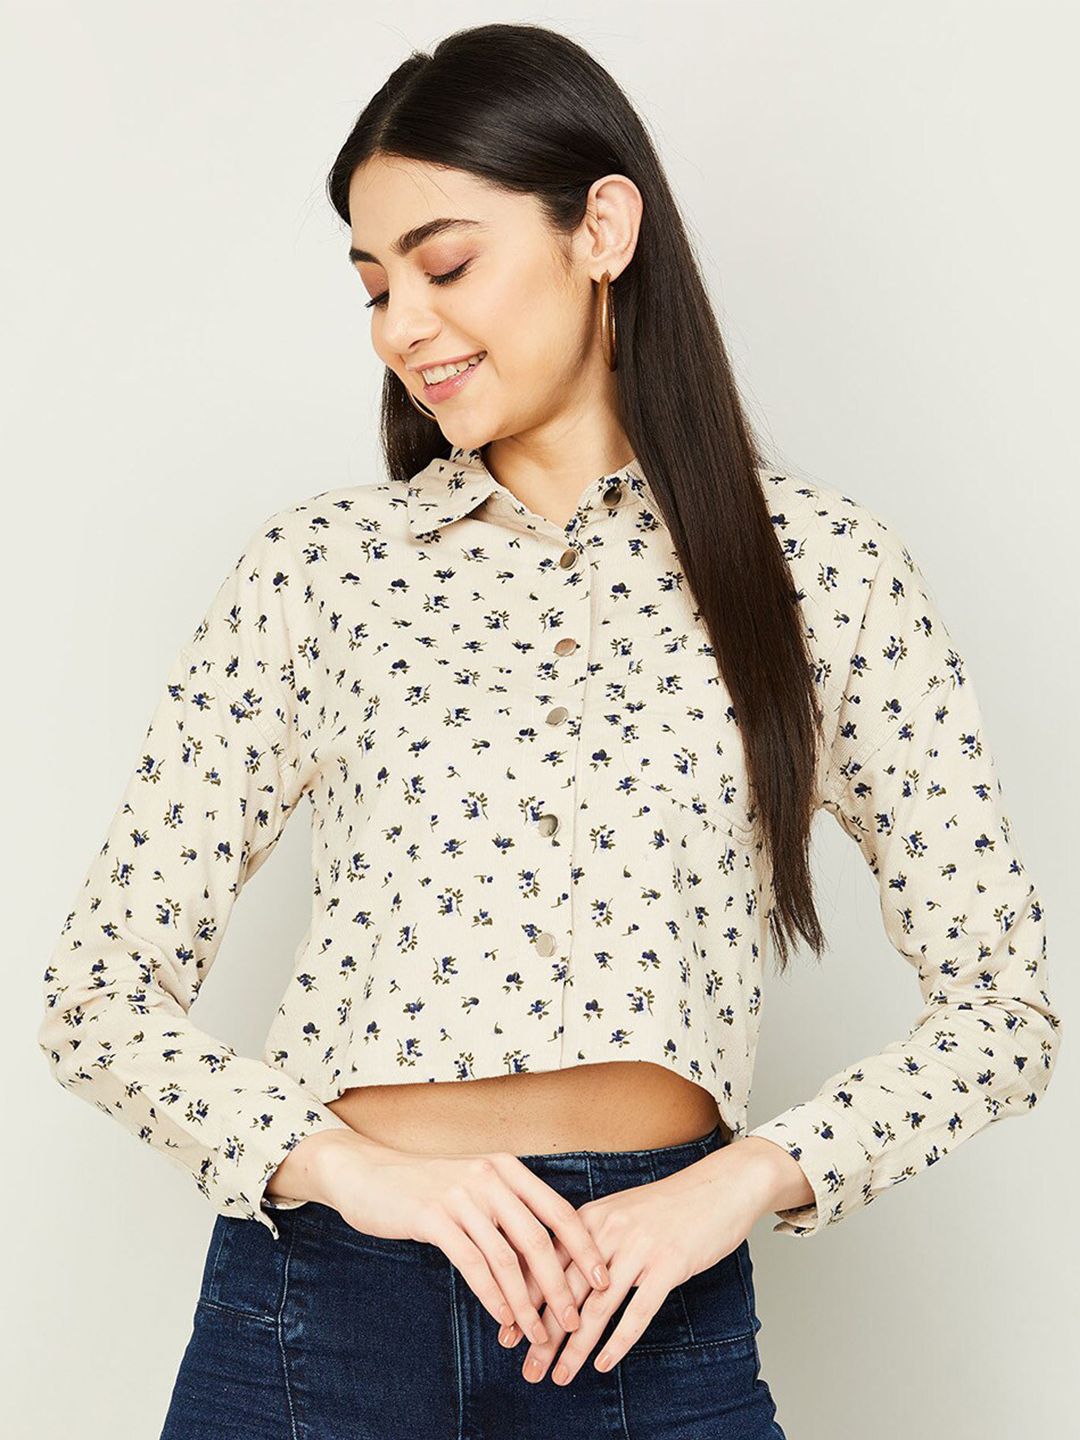 Ginger by Lifestyle Beige Floral Print Shirt Style Crop Top Price in India